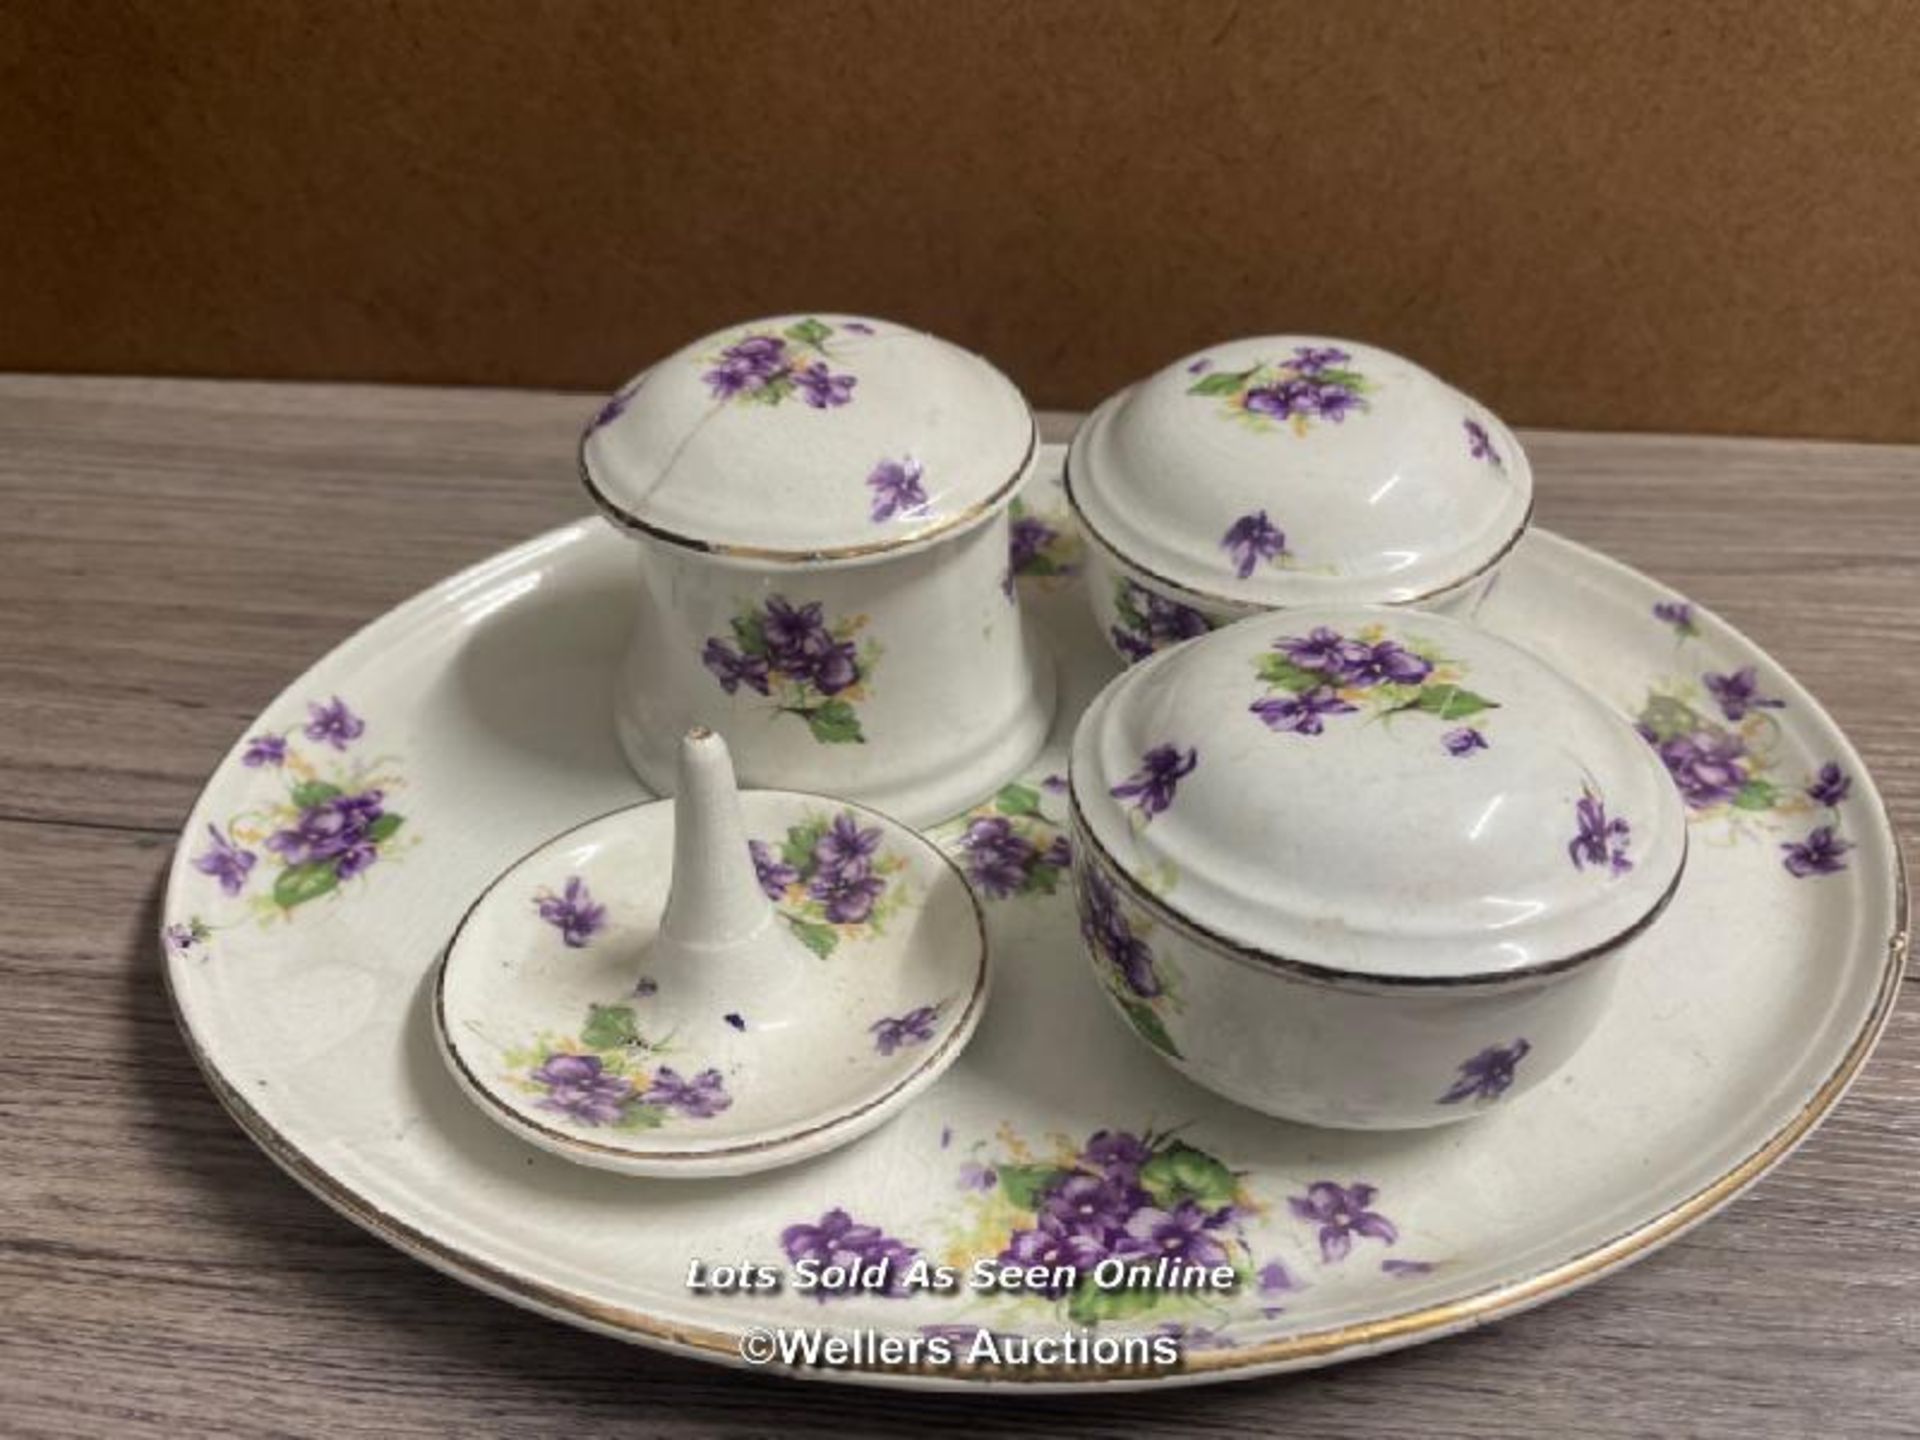 EARLY 2OTH CENTURY CERAMIC DRESSING TABLE SET DECORATED WITH VIOLETS